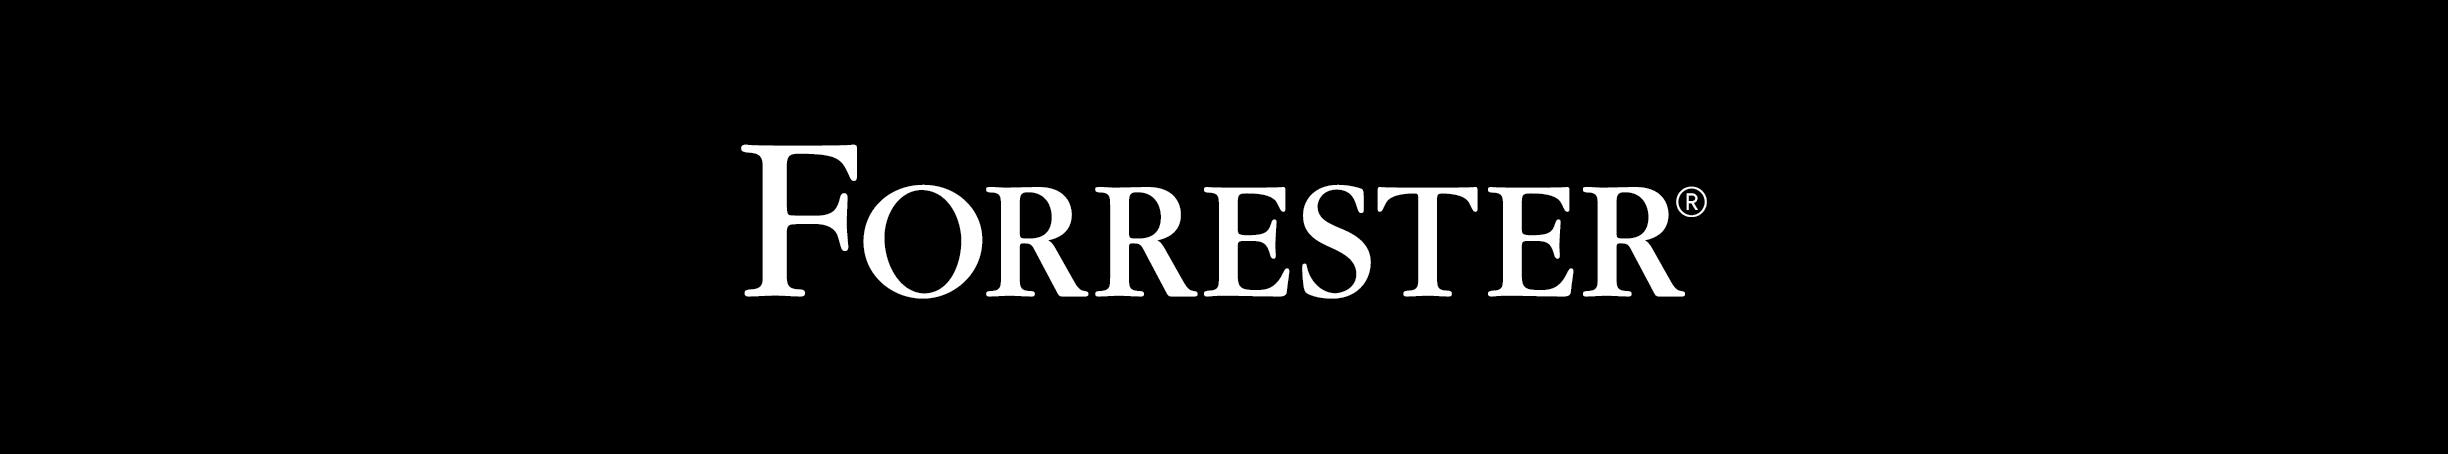 Forrester Names Ansira a Strong Performer in Loyalty Service Providers Report